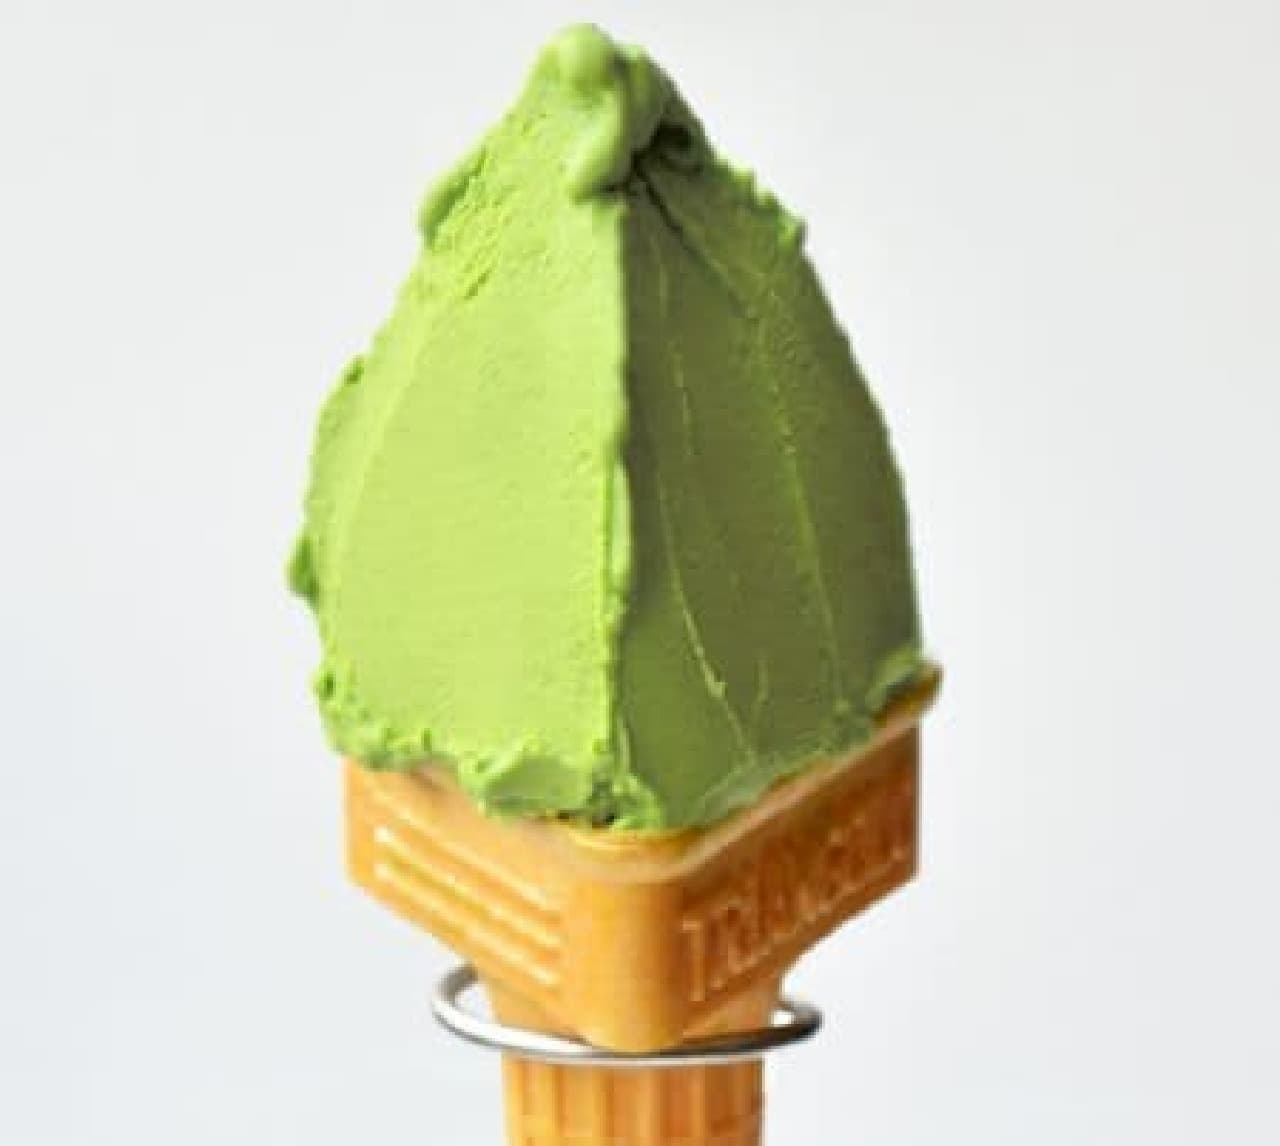 The "Minister's Award Matcha" is a high-class matcha gelato limited to 150 bottles using "Tencha", which won the Minister of Agriculture, Forestry and Fisheries Award at the National Tea Fair.